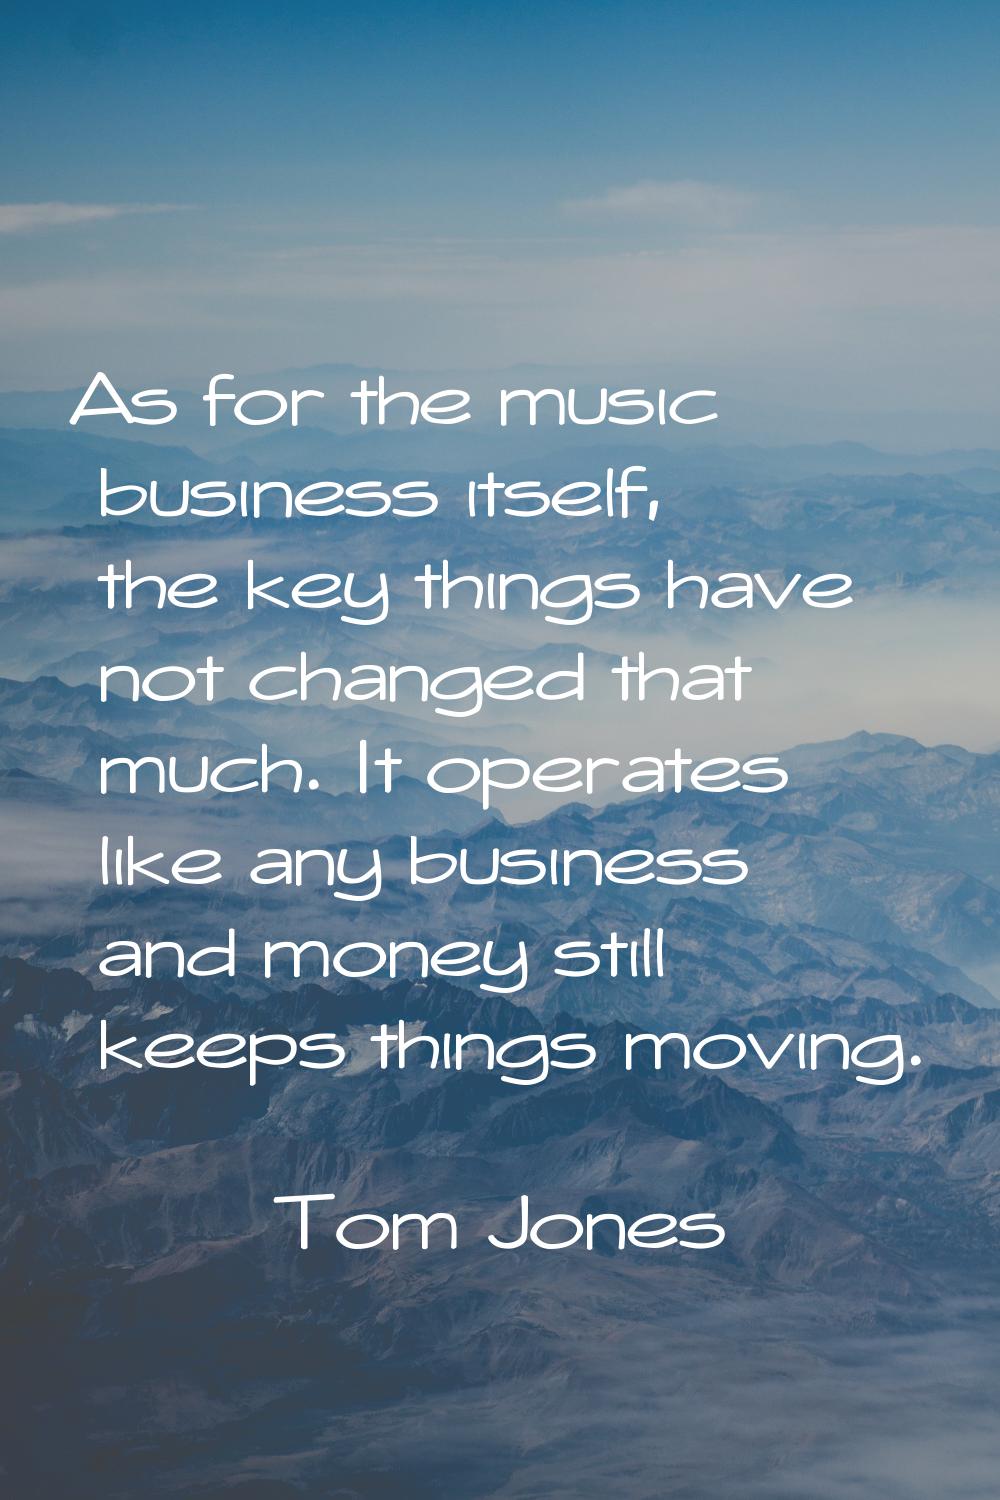 As for the music business itself, the key things have not changed that much. It operates like any b